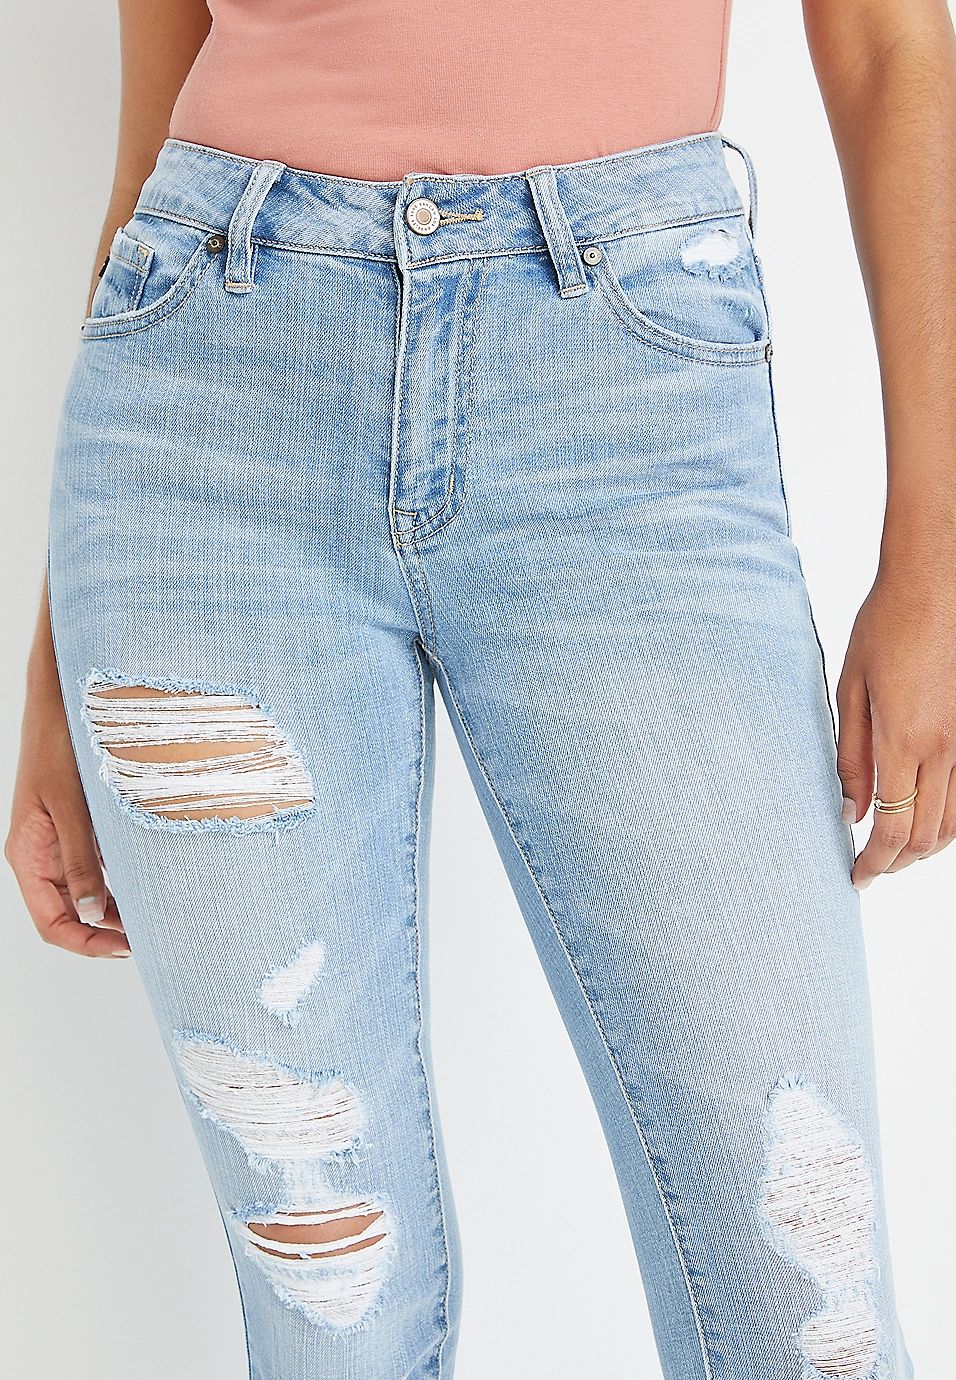 KanCan™ High Rise Light Wash Ripped Skinny Jean | Maurices